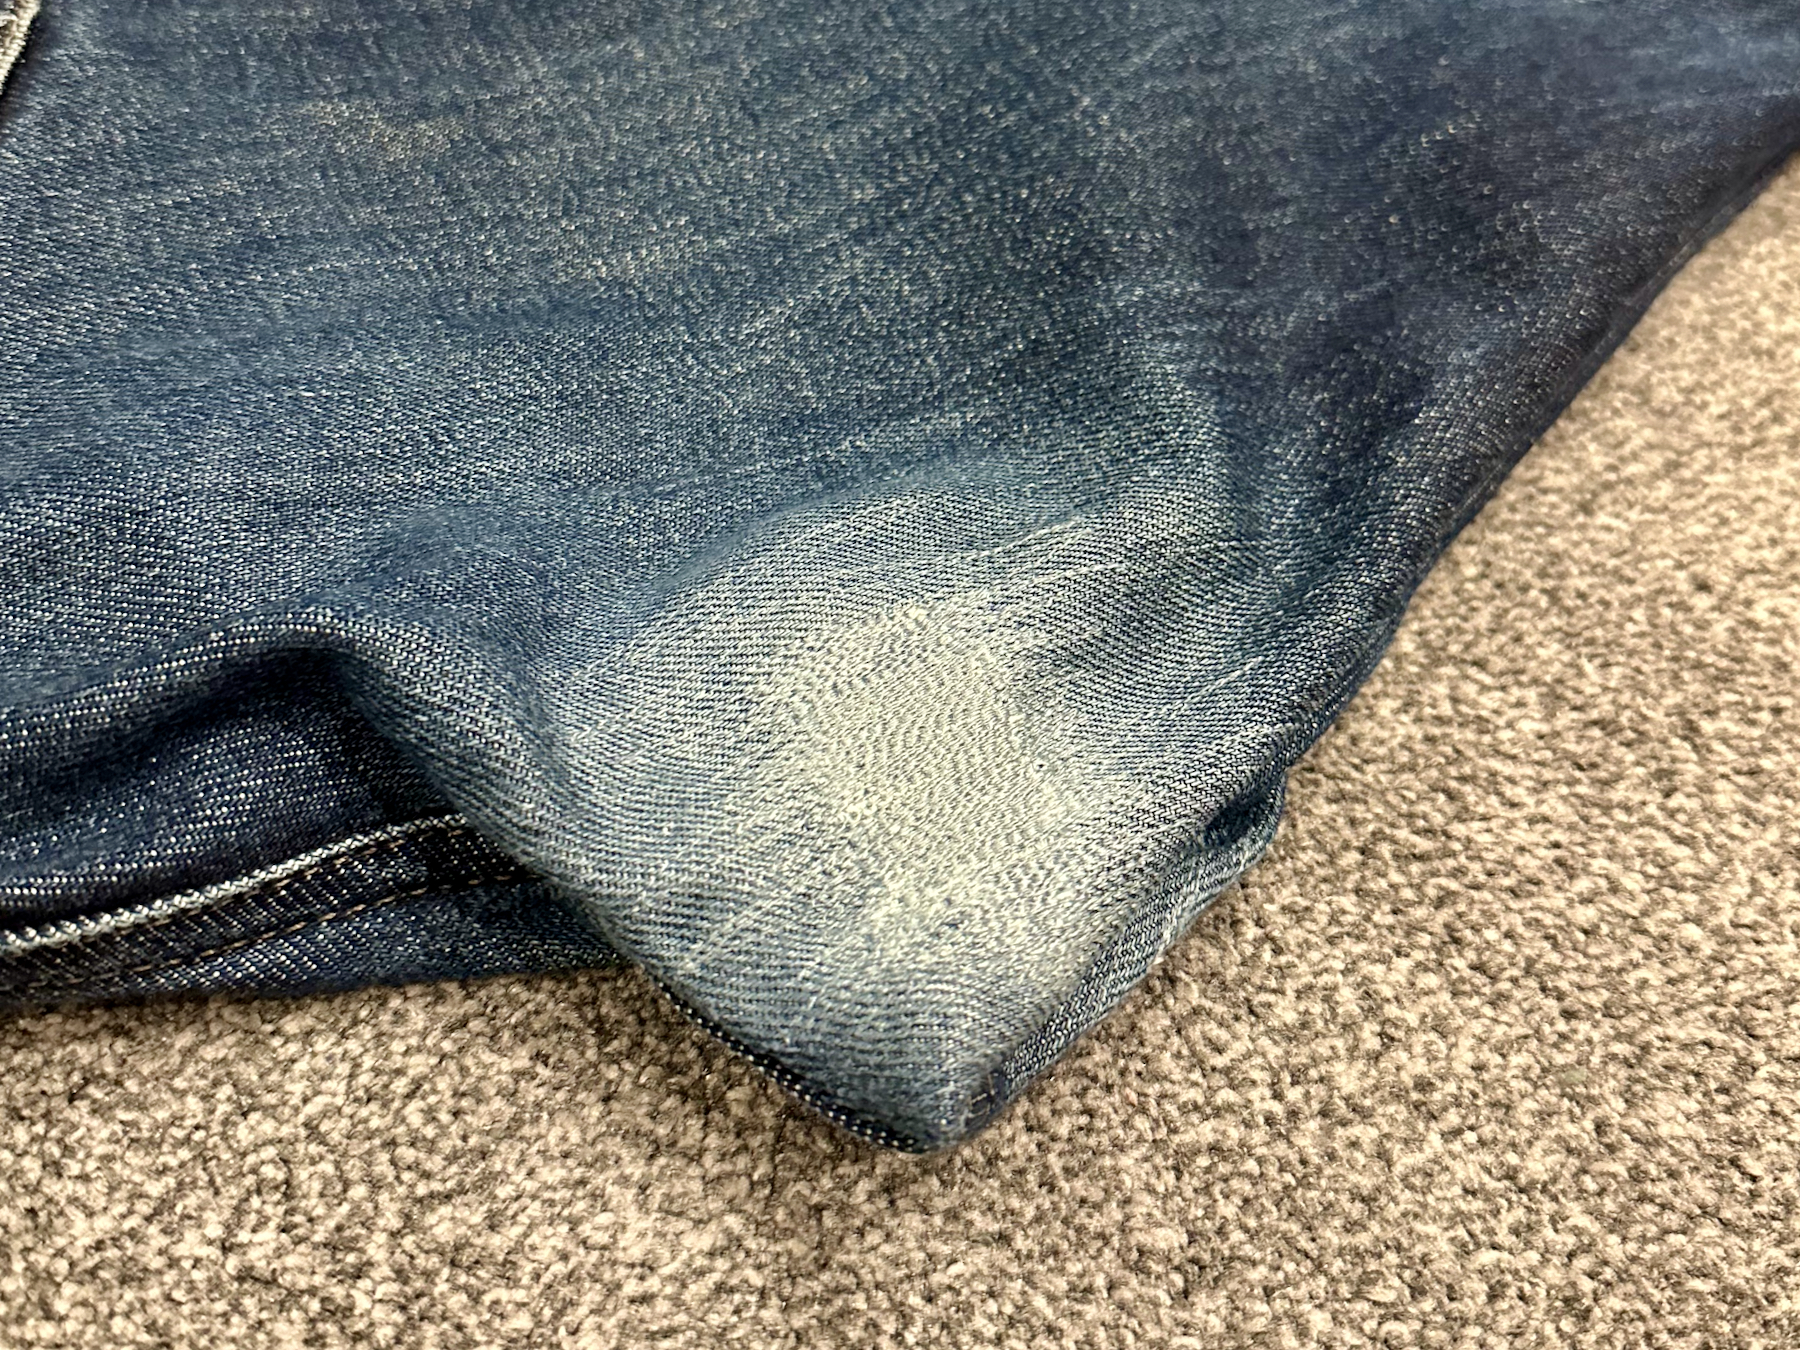 Photo of the crutch area of some jeans that have been paired with colour-matched stitching on the worn part of the denim